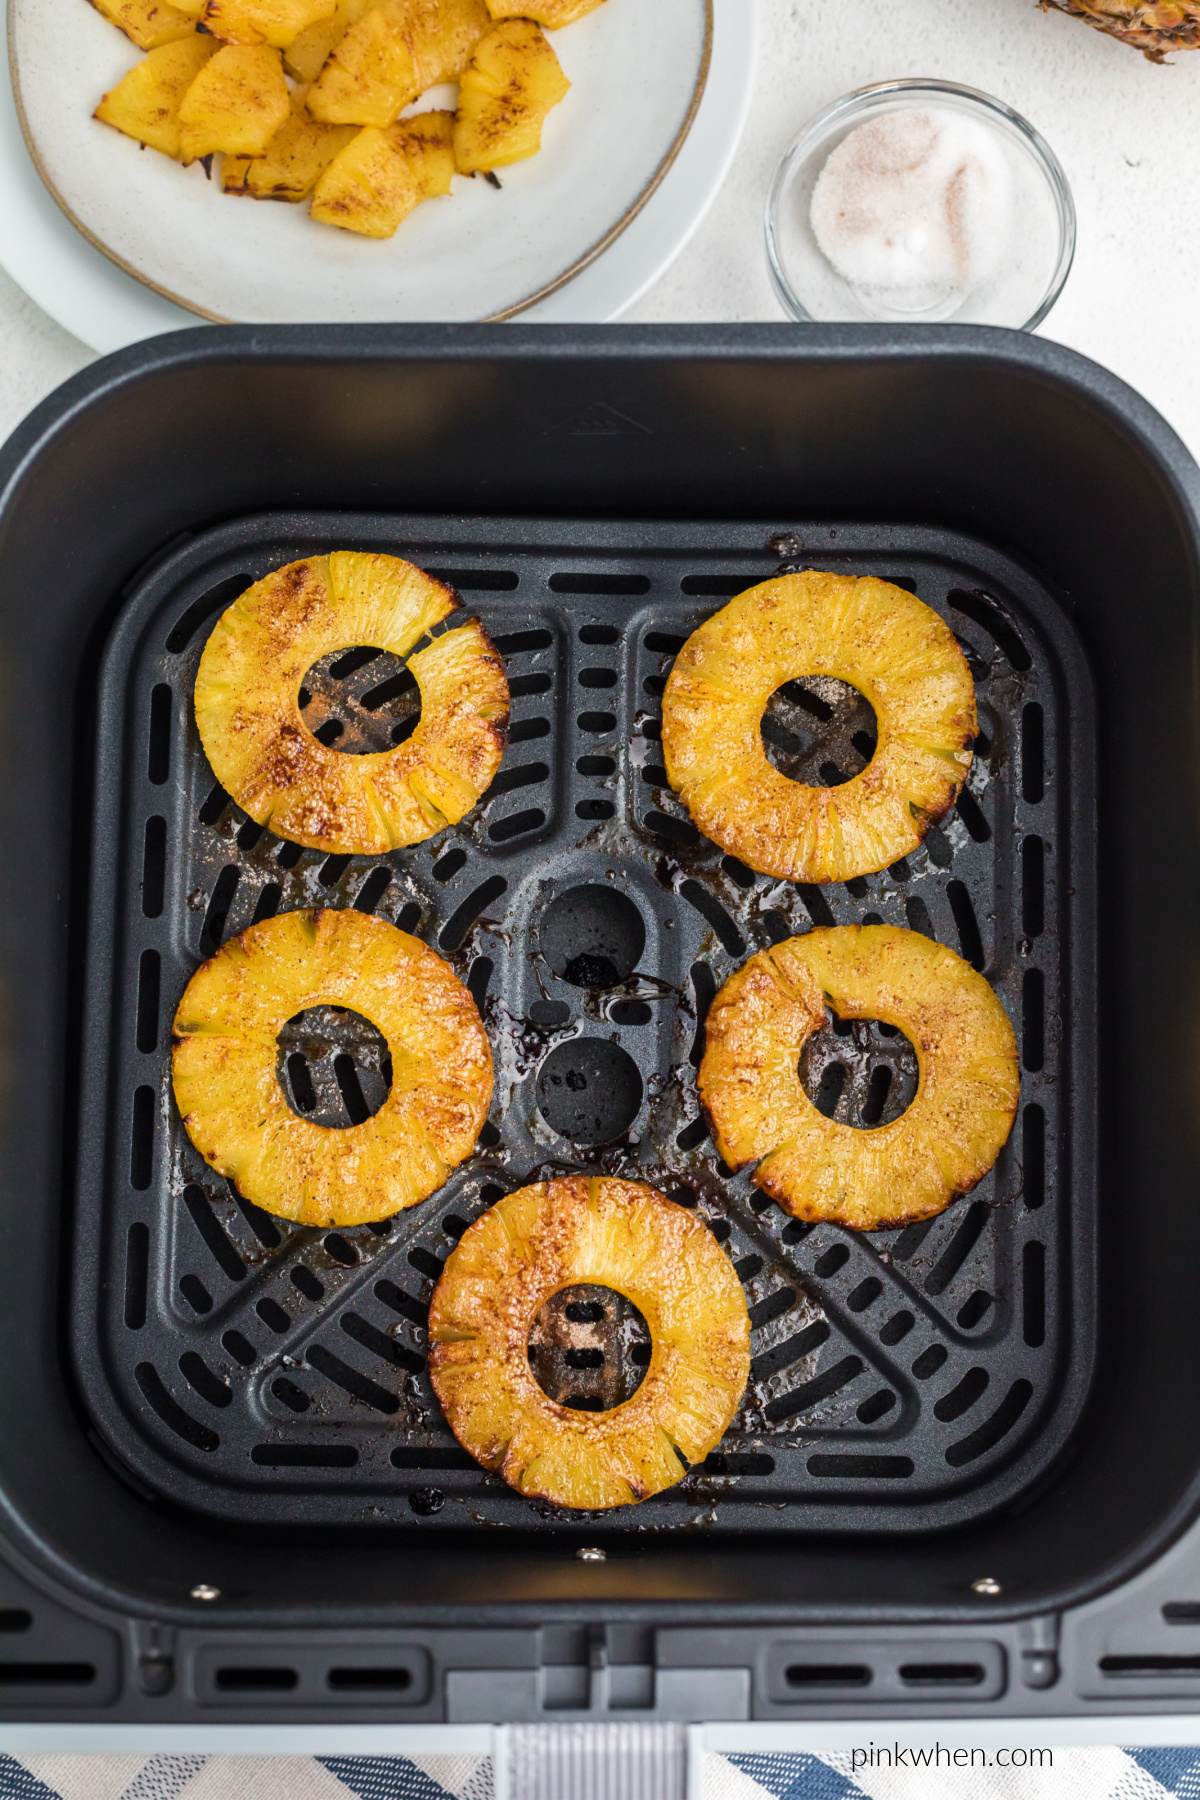 Pineapple rings sprinkled with cinnamon and sugar and air fried.